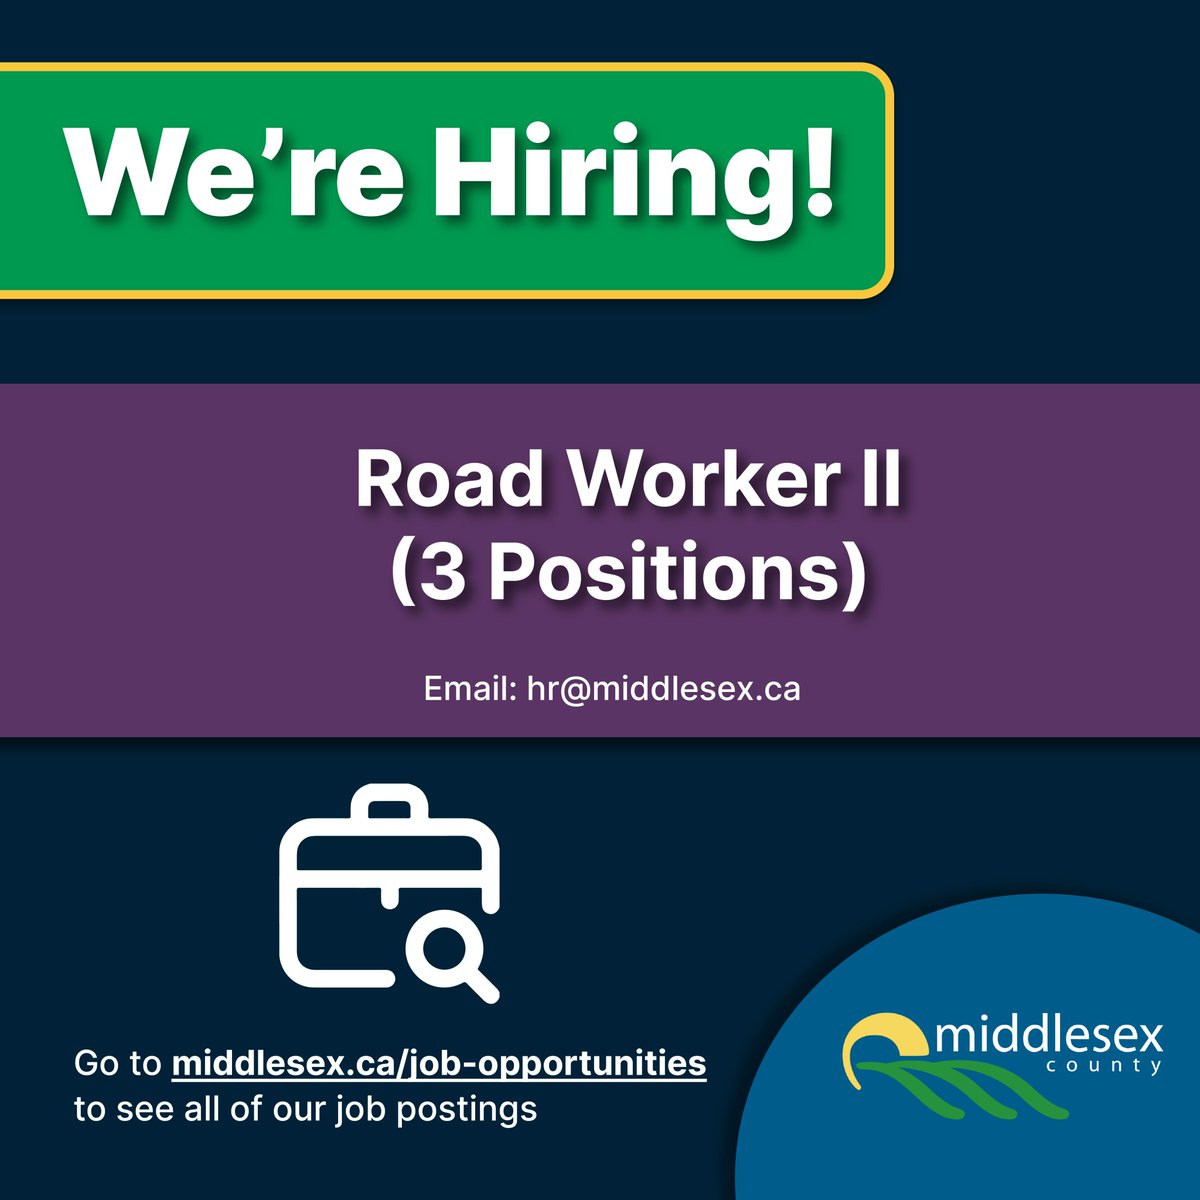 📍 Job Opportunity 📍 Middlesex County is hiring for Road Worker II positions! If you're skilled in road maintenance, repair, and construction, this could be your chance to make a meaningful impact in our community. Apply today ➡ middlesex.ca/careers/road-w…